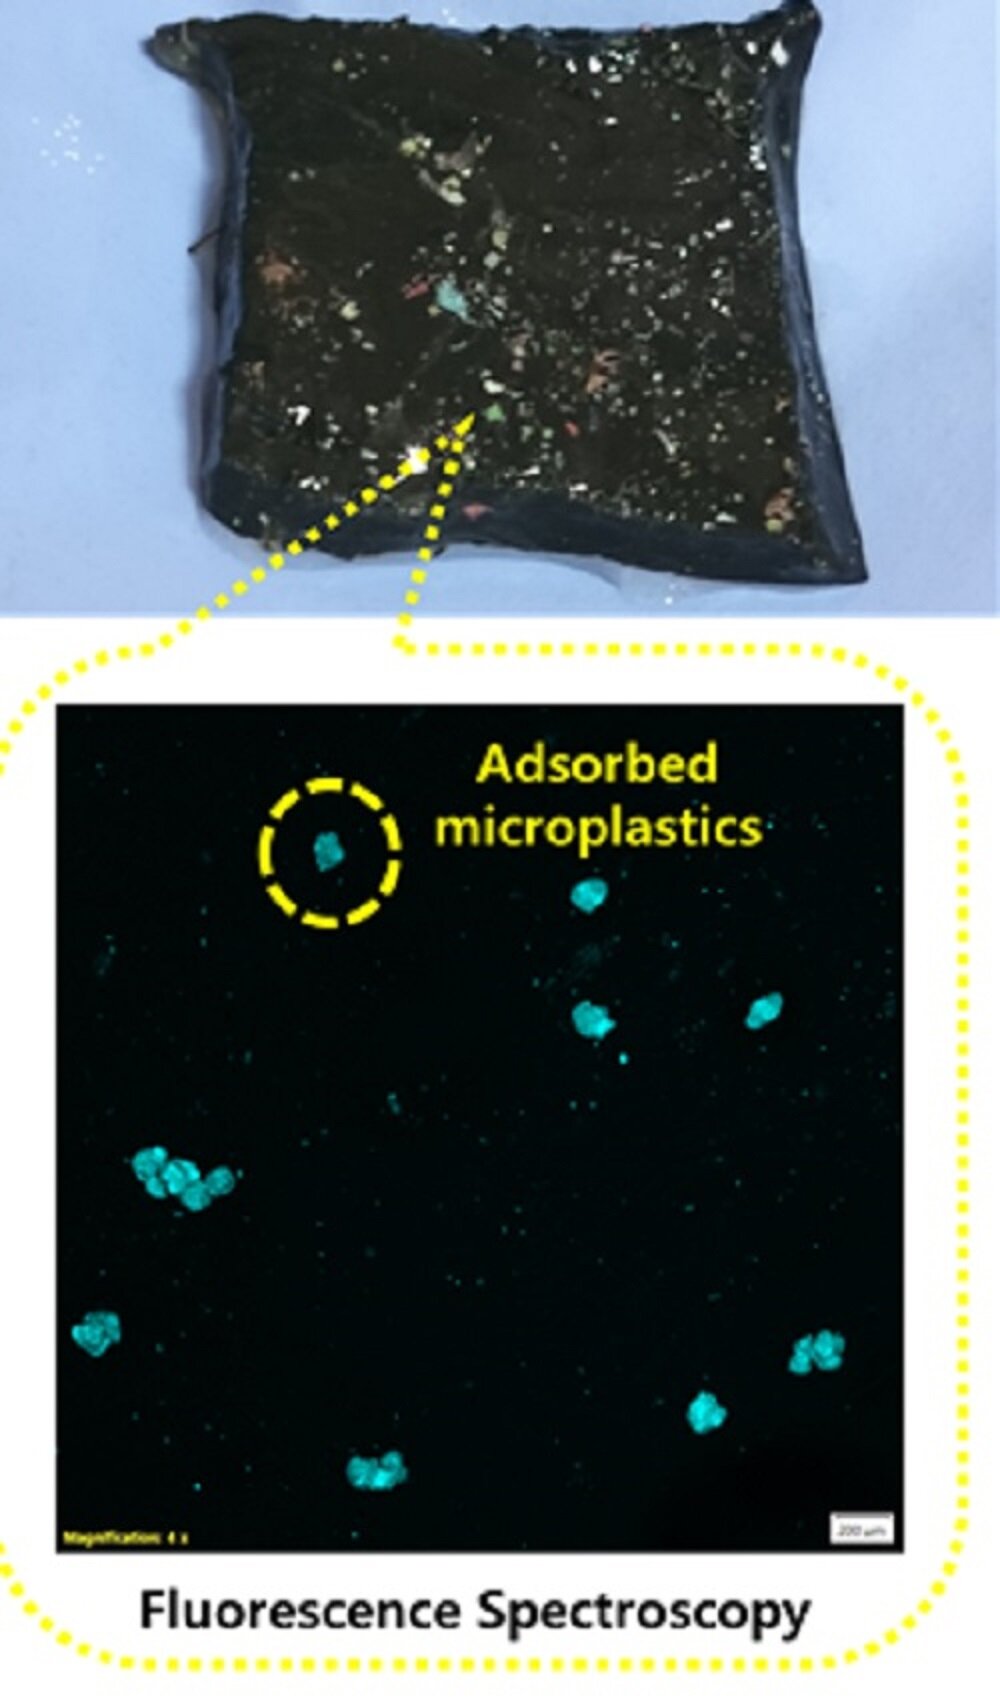 Novel hydrogel removes microplastics from water 